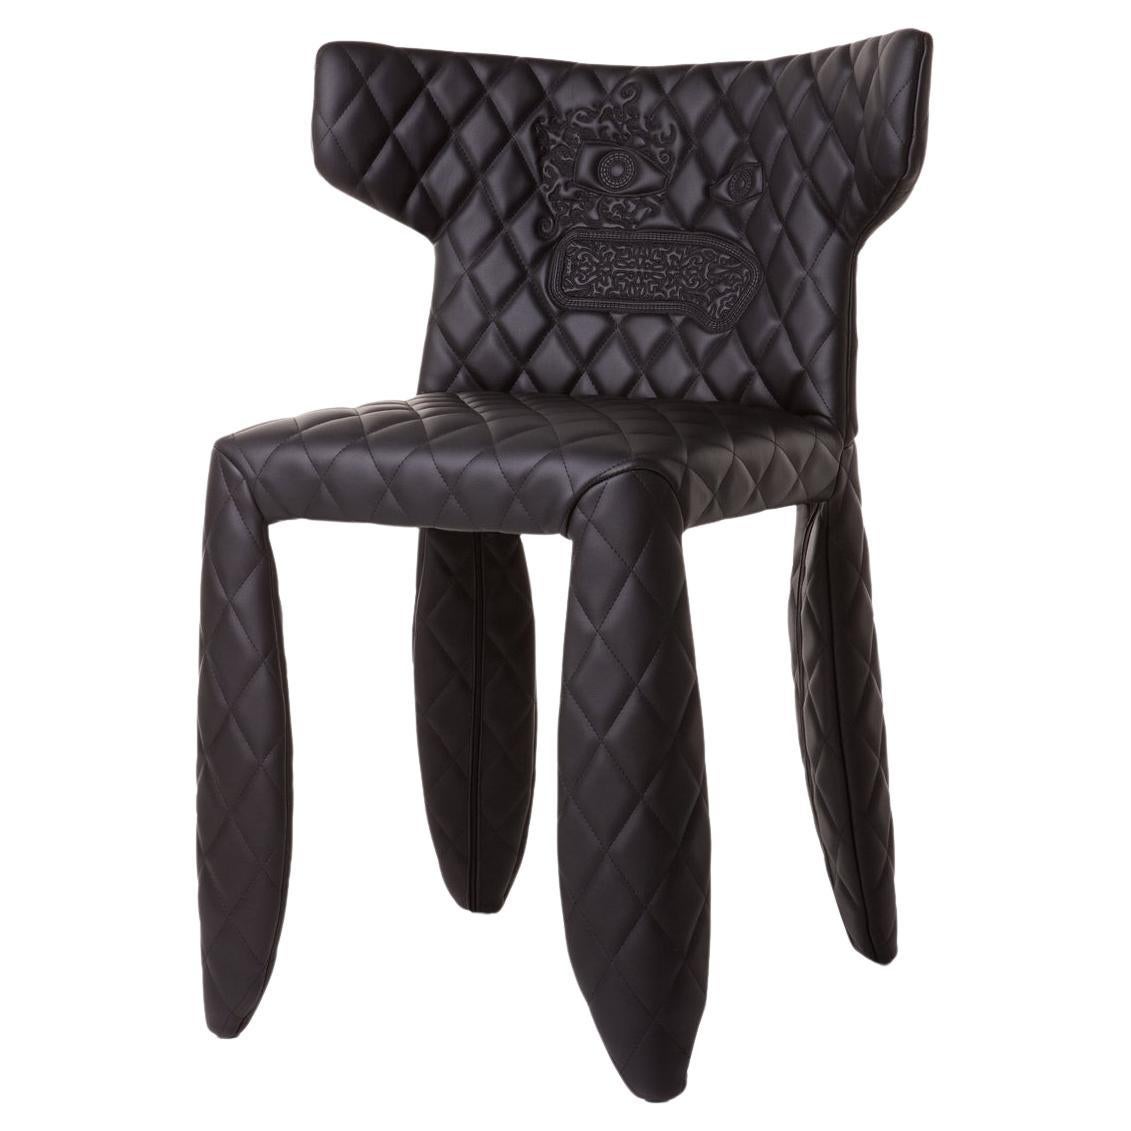 Moooi Monster Diamond Chair with Arms in Black with Embroidery Upholstery For Sale